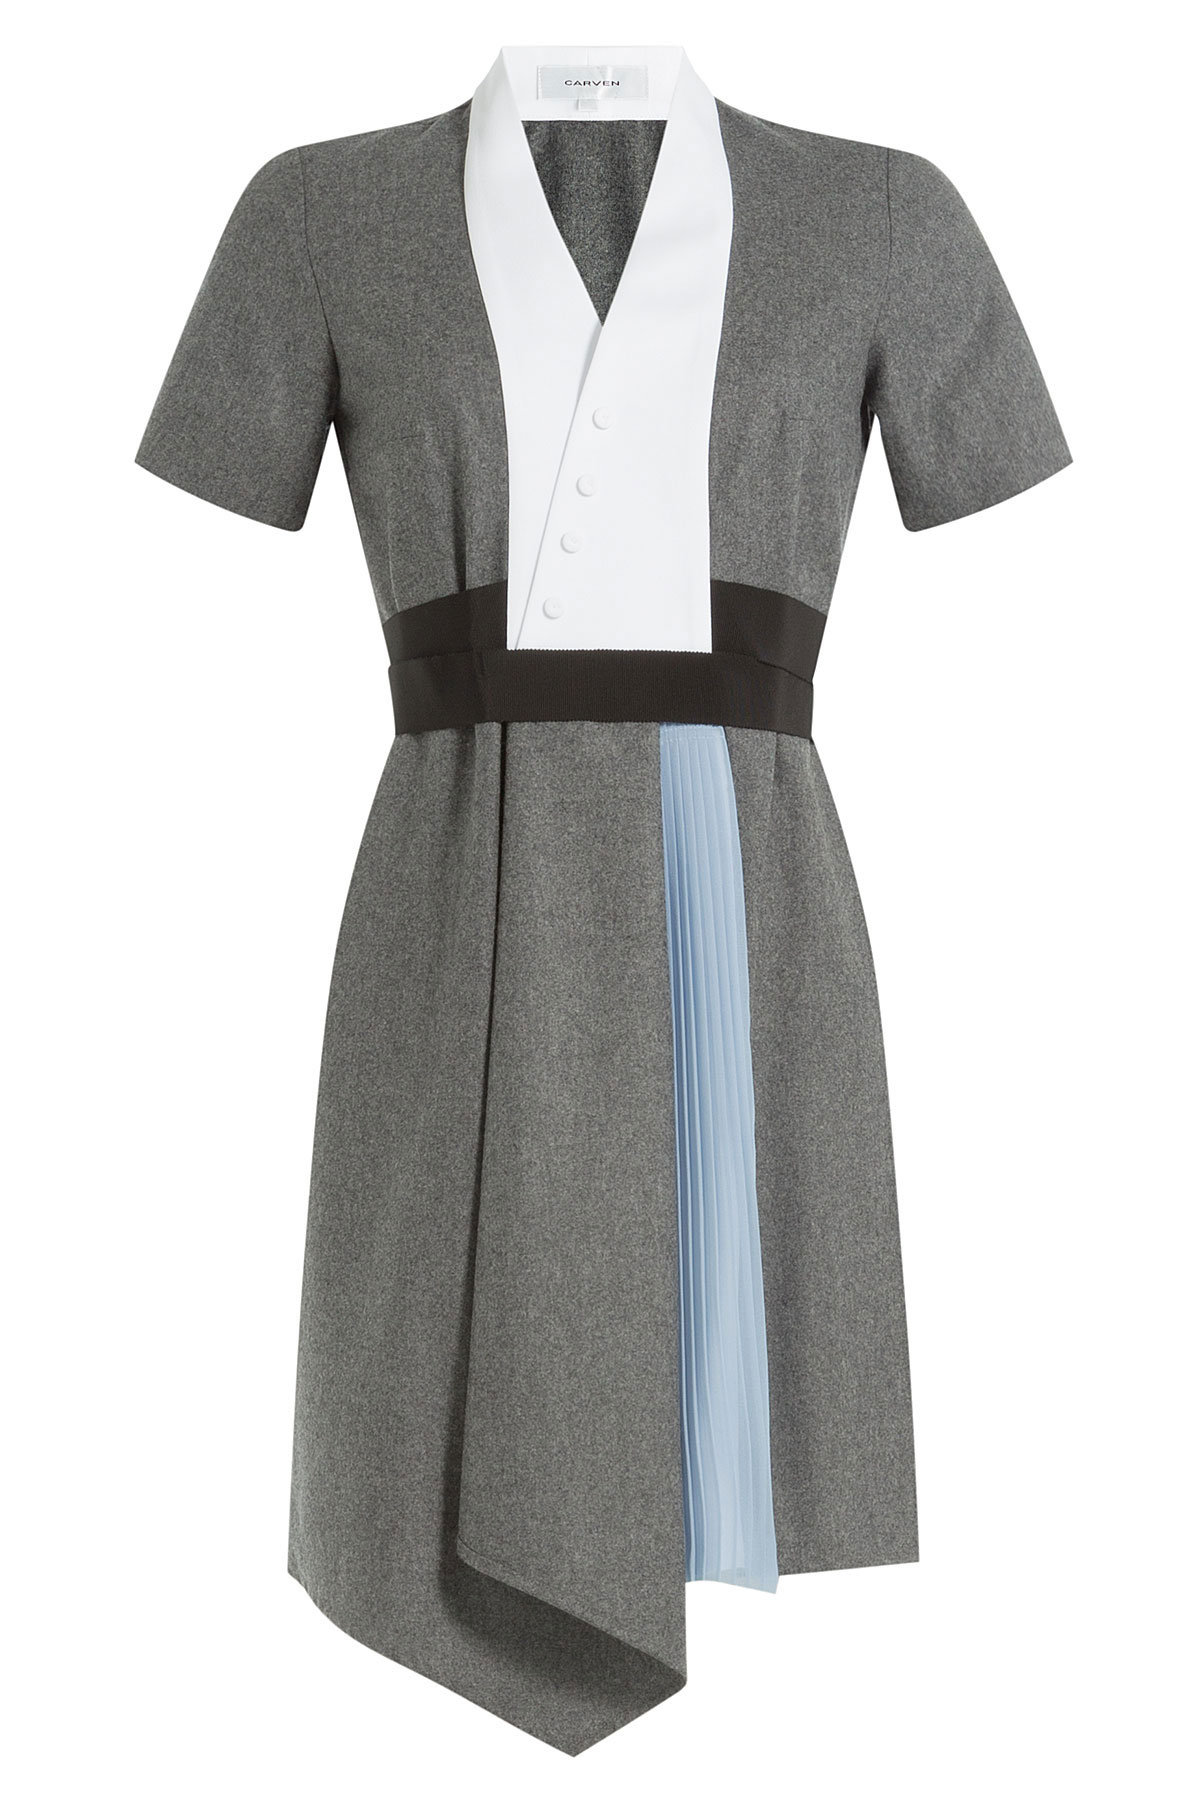 Carven - Wool Dress with Pleated Insert